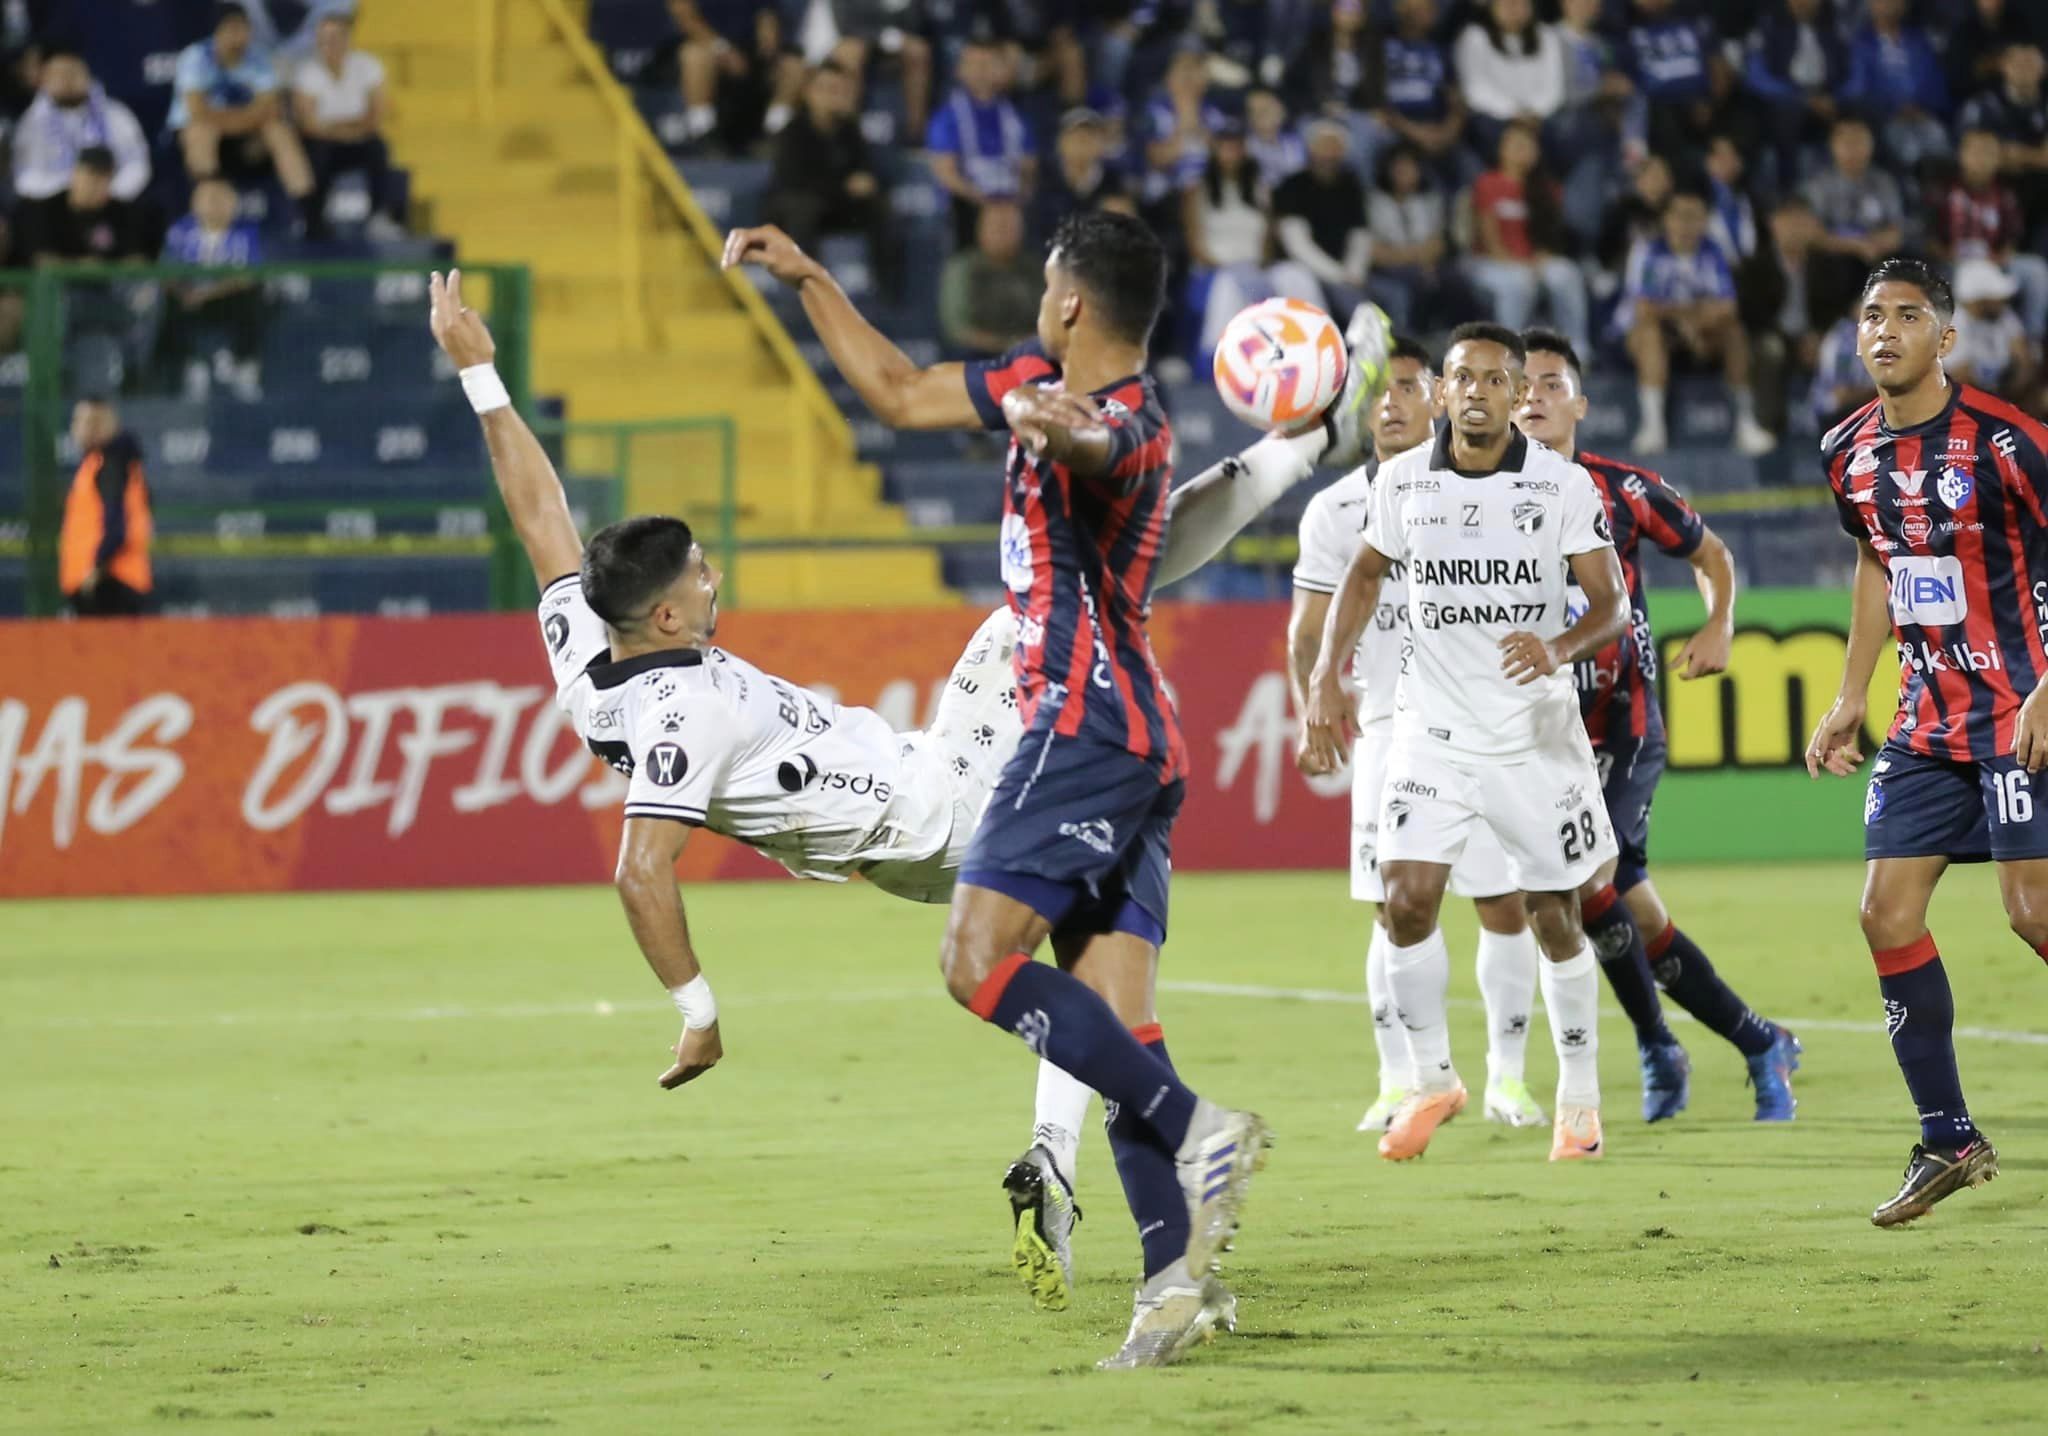 This is Gerardo Cardillo’s Chilean goal in a communications match against Cartagena.